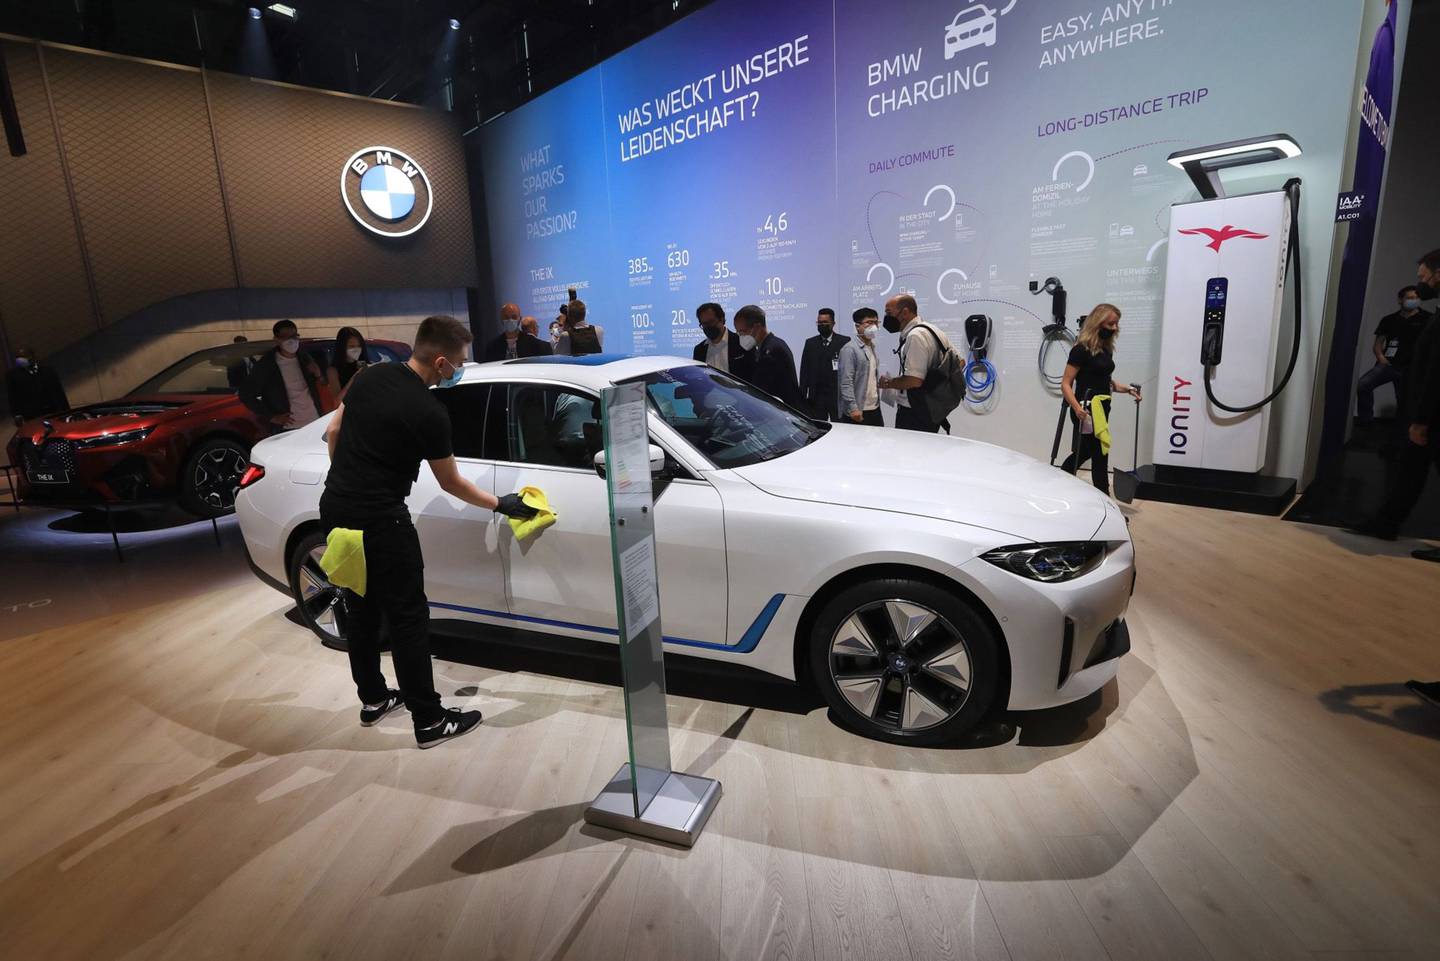 The BMW i4 sedan is like an electrified BMW 4 Series vehicle, with an estimated 300-mile range and a starting price of just over $55,000. BMW is offering two variant choices: an i4 eDrive40 (335 horsepower, zero to 60 mph in 5.7 seconds, rear-wheel drive, and a range of up to 300 miles) and an i4 M50 (536 horsepower, zero to 60 mph in 3.9 seconds, all-wheel drive, and range up to 240 miles). Deliveries are expected to begin in the first part of 2022. Photographer: Krisztian Bocsi/Bloombergdfd